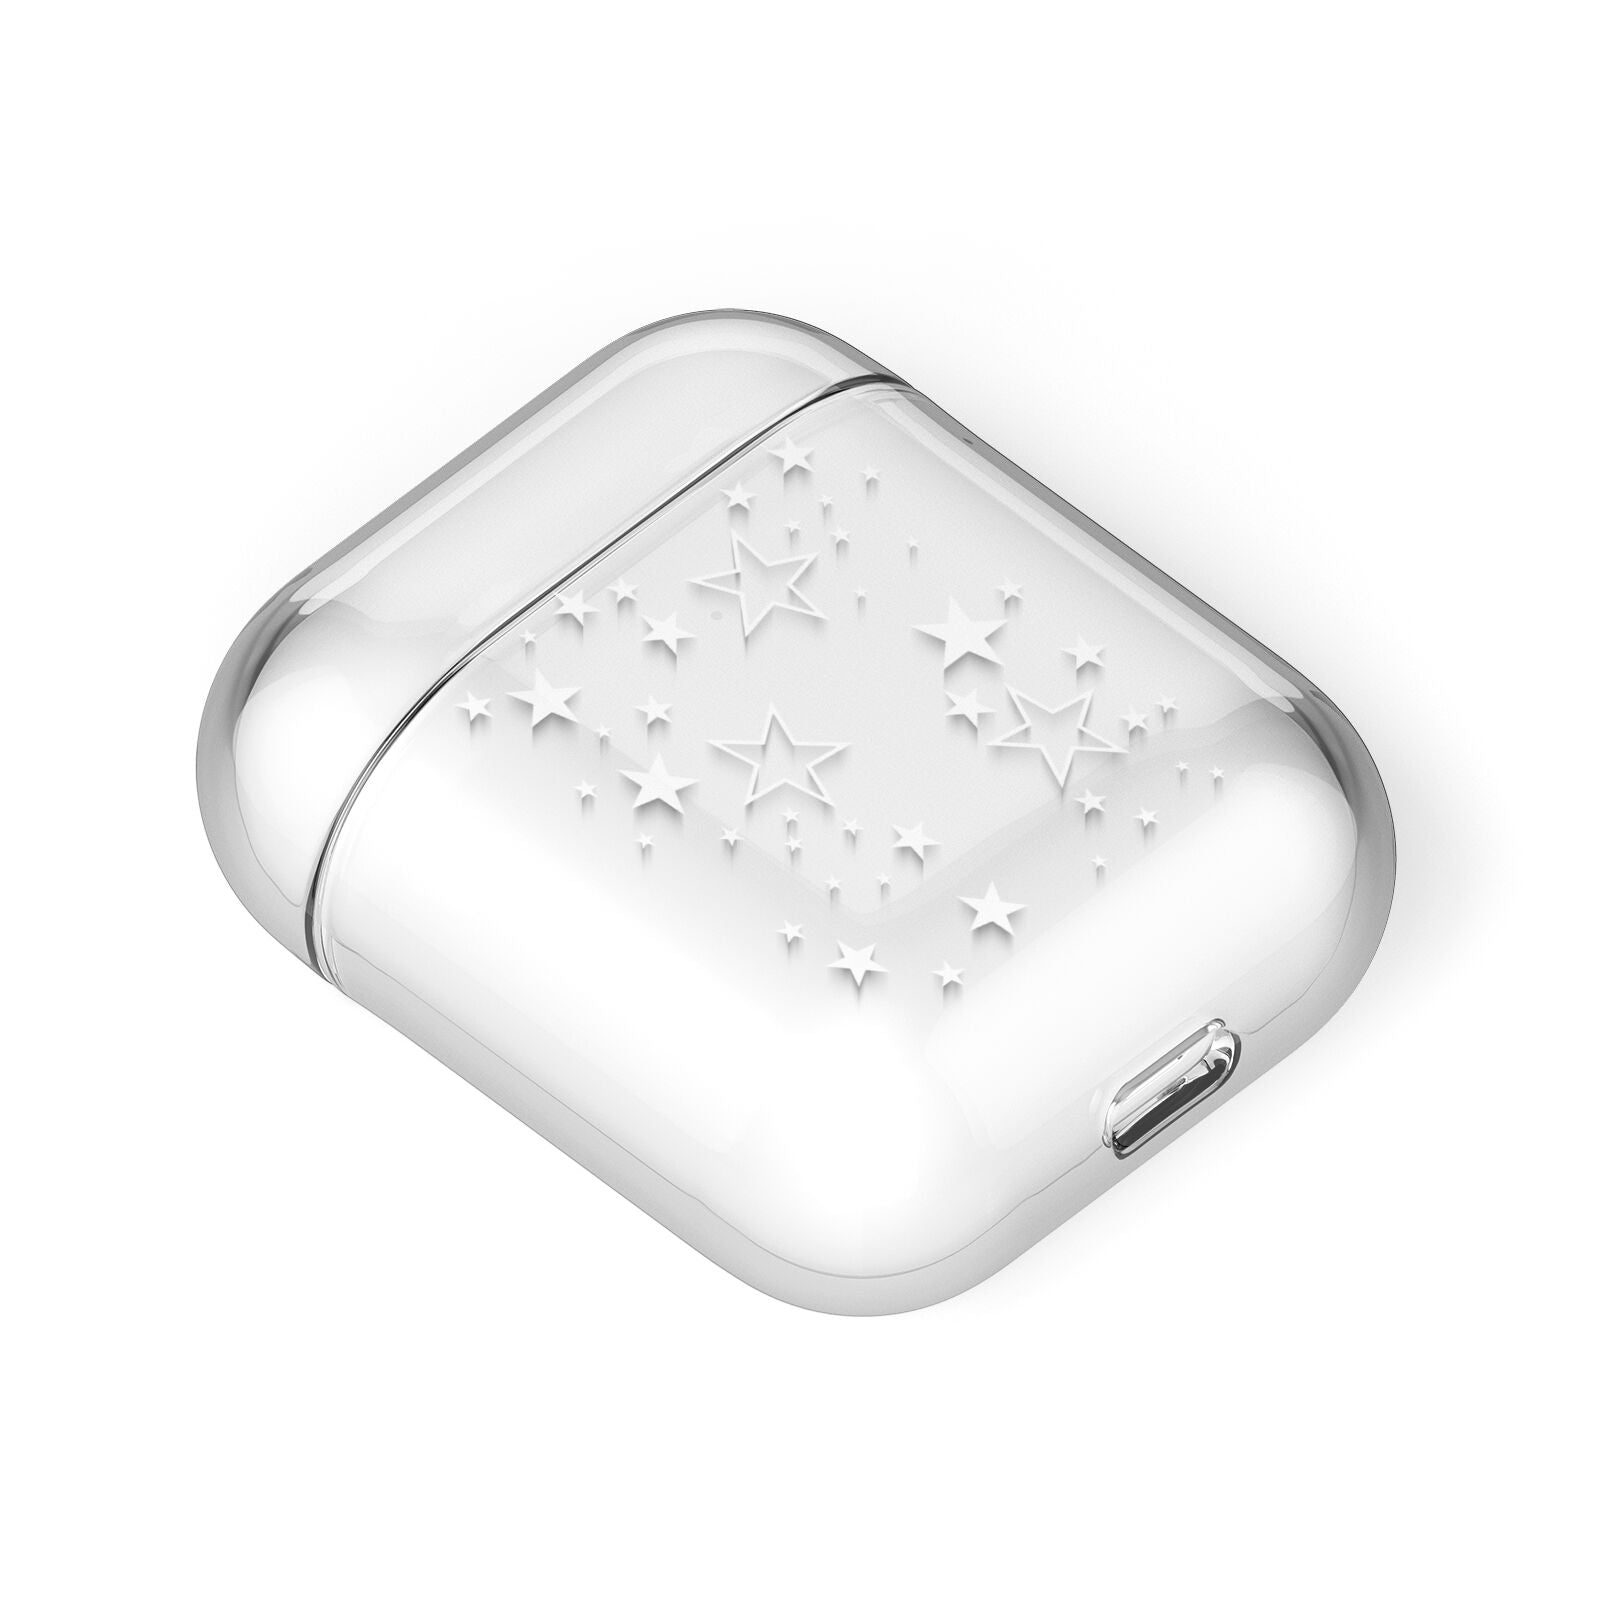 White Star AirPods Case Laid Flat